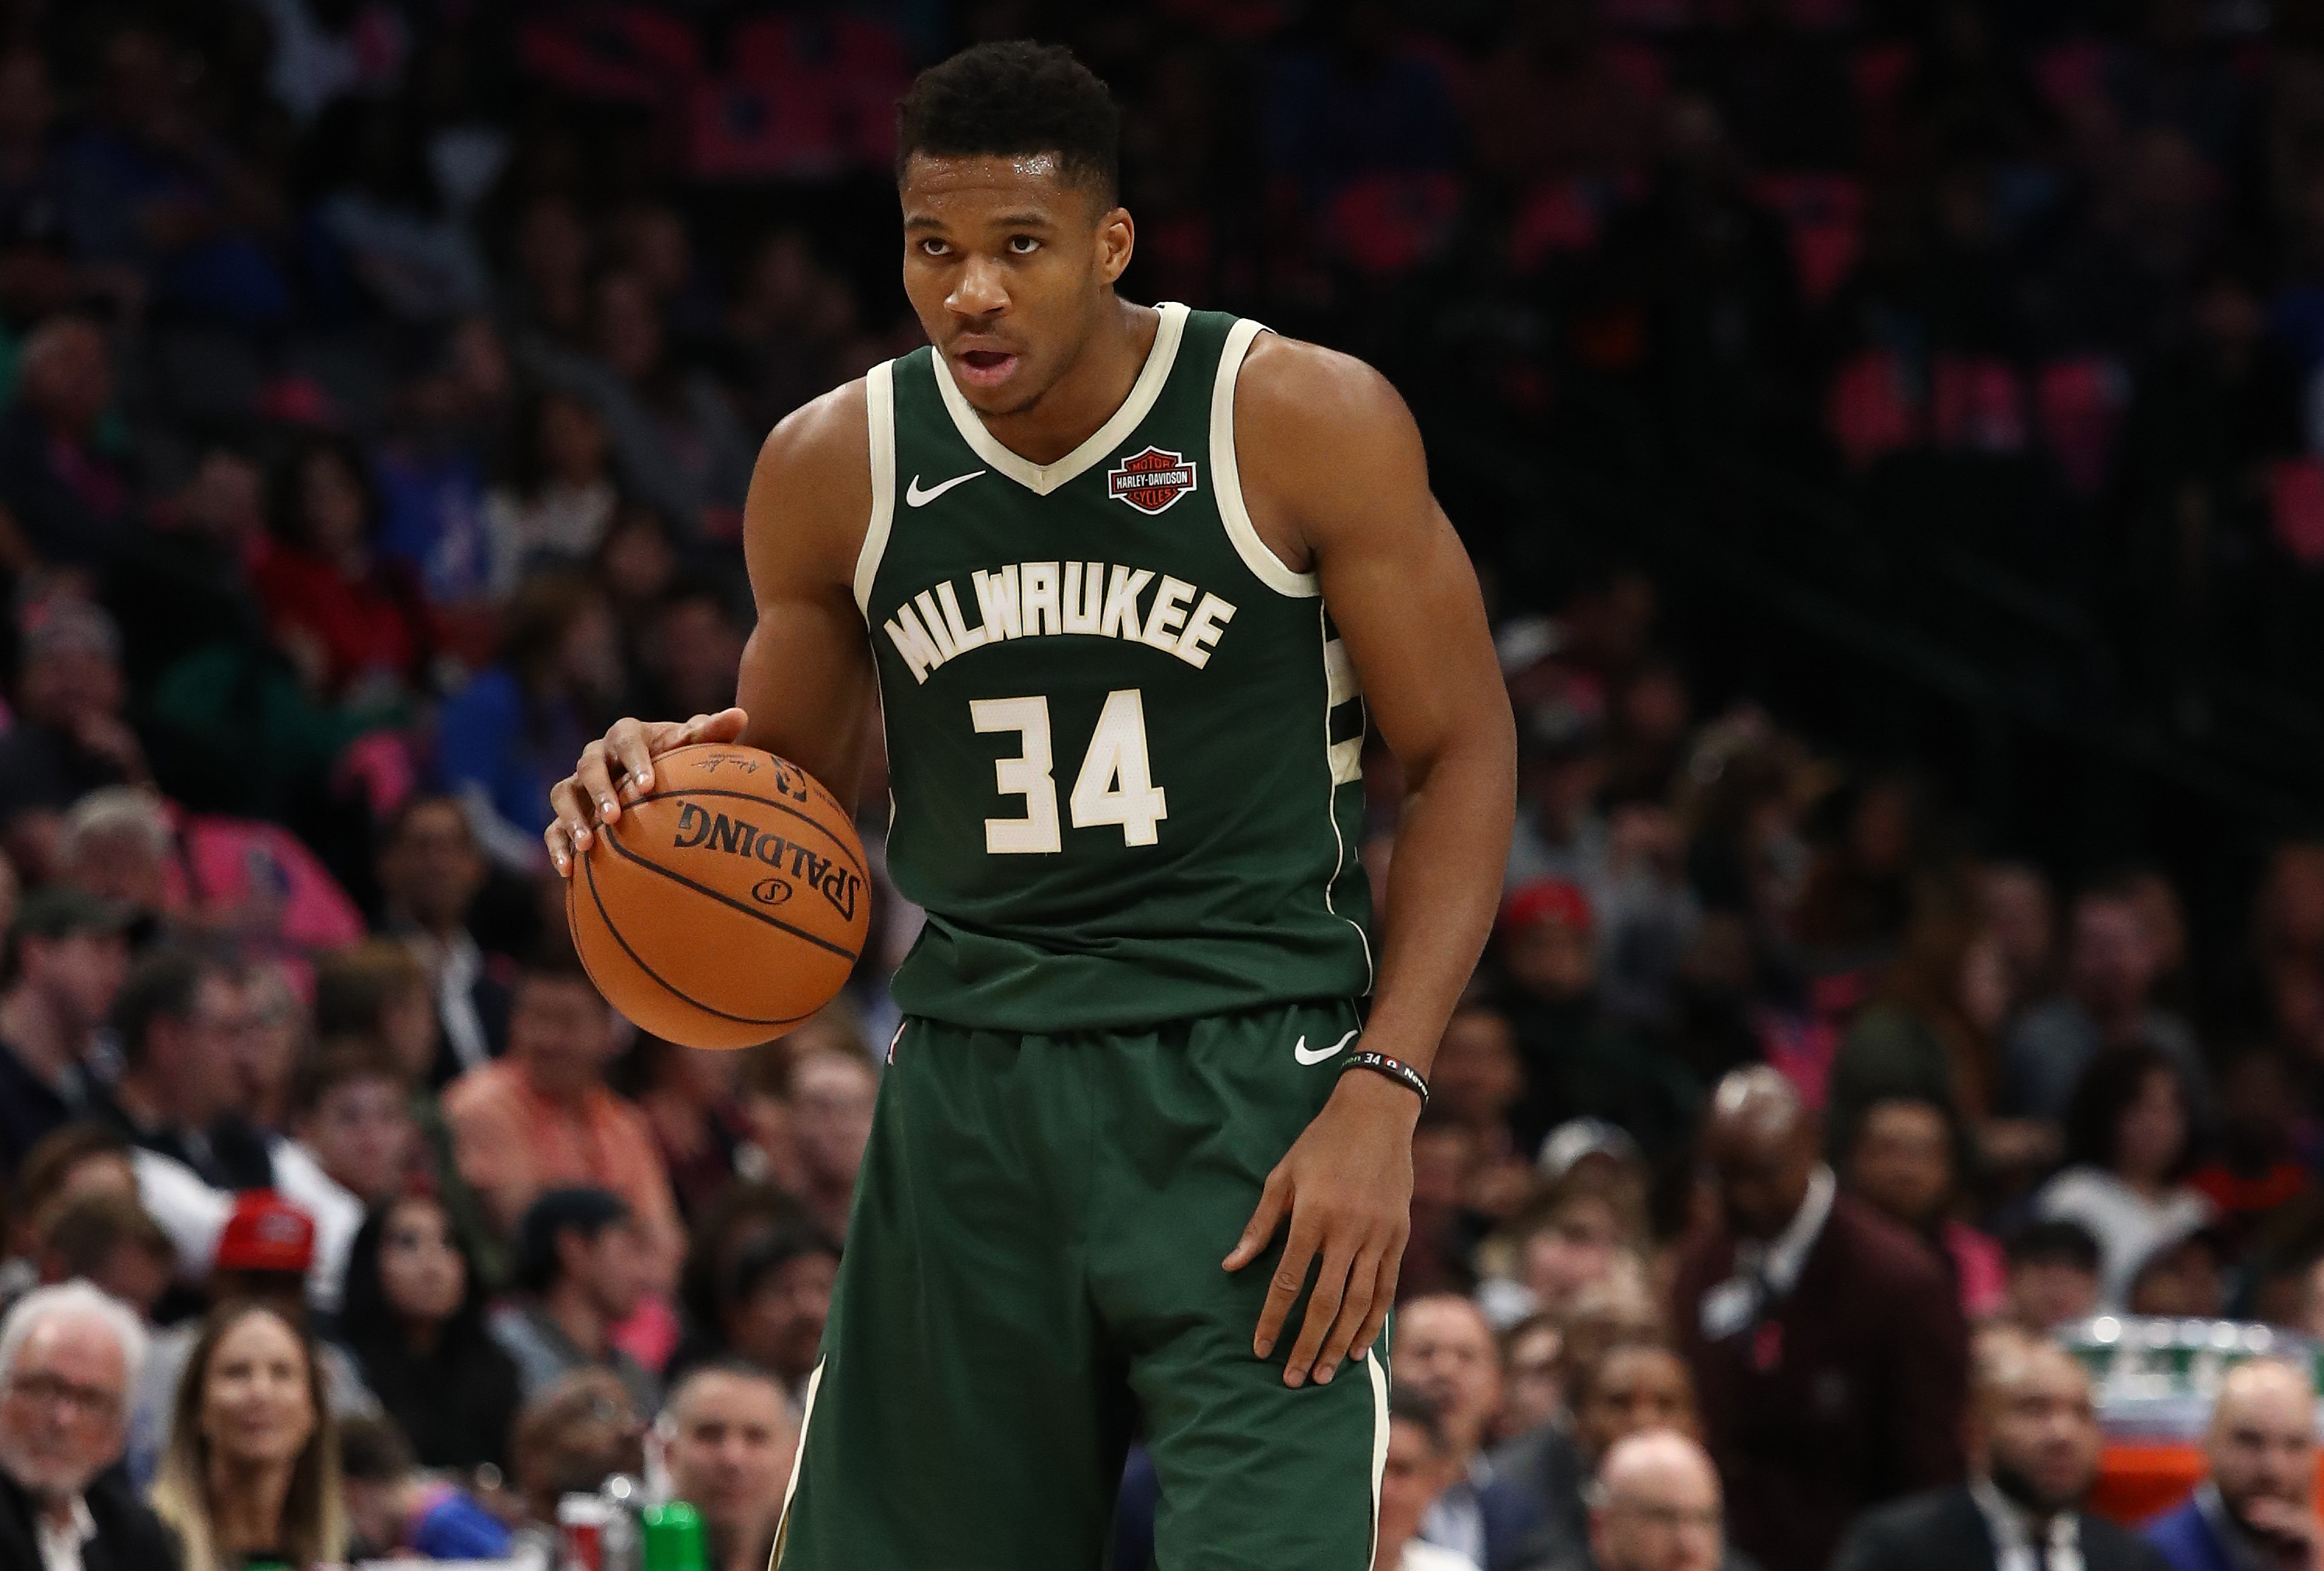 Check out video of Giannis Antetokounmpo from his rookie year